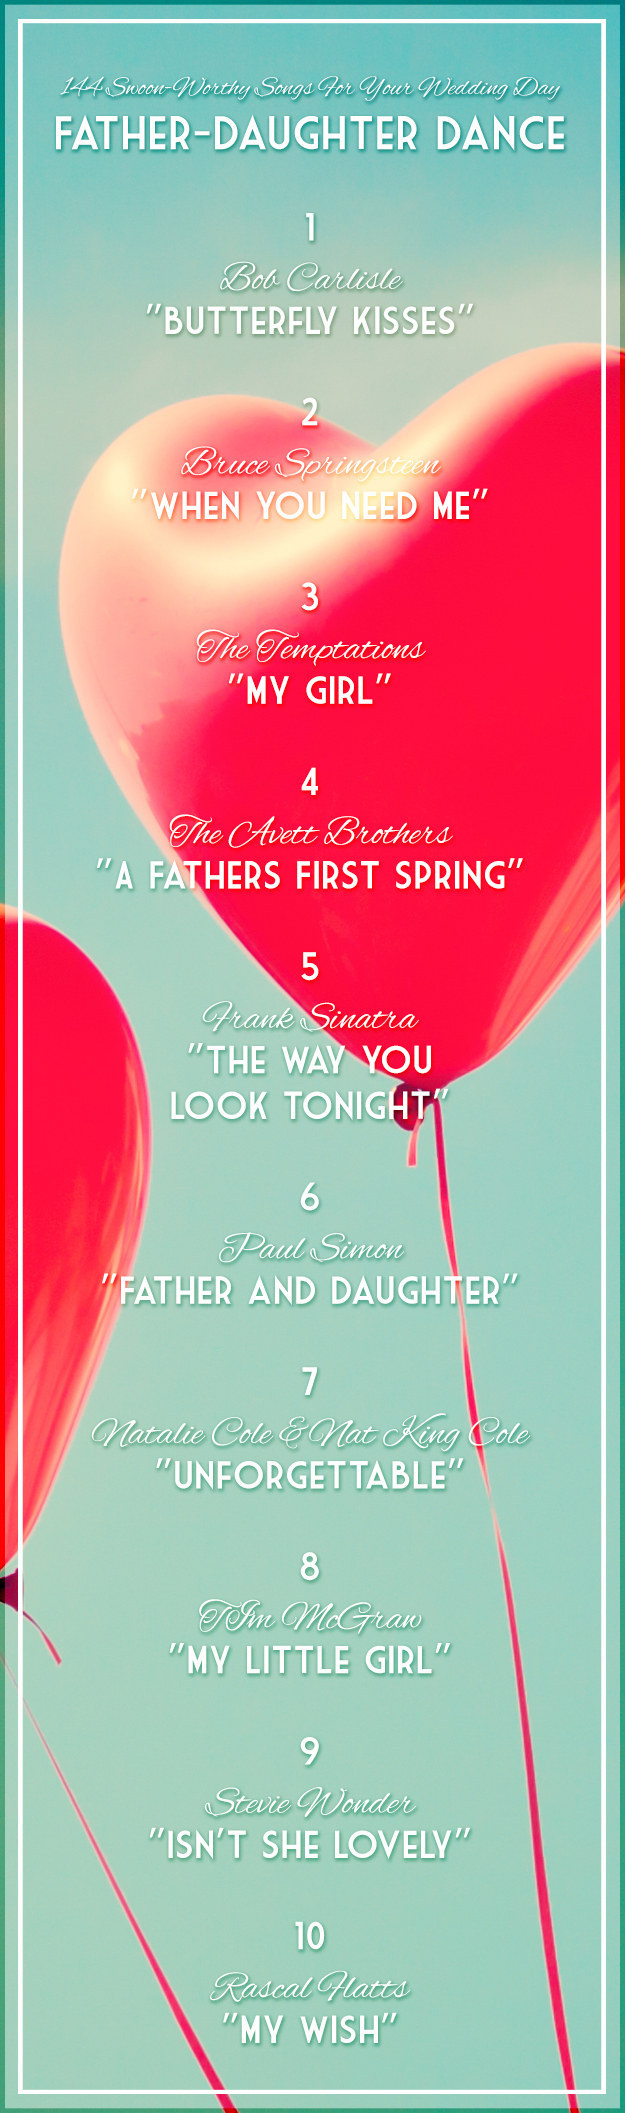 father daughter wedding dance songs